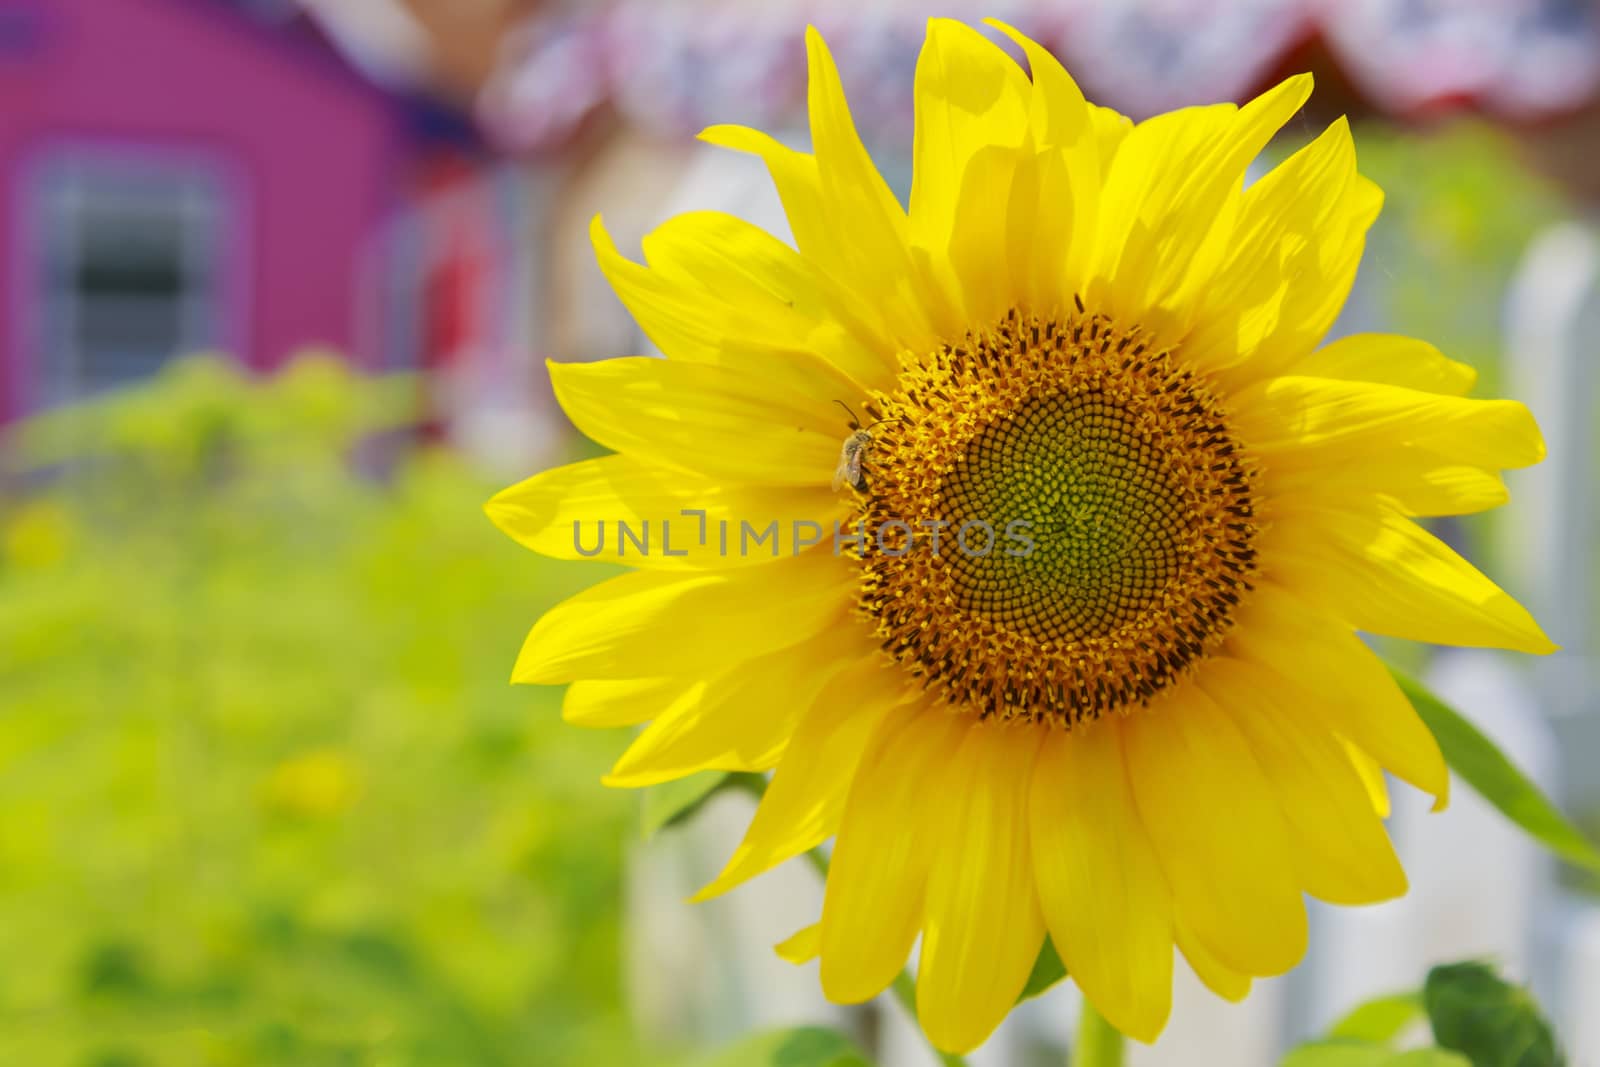 Single perfect sunflower. Bright yellow petals with a quaint country home backdrop.